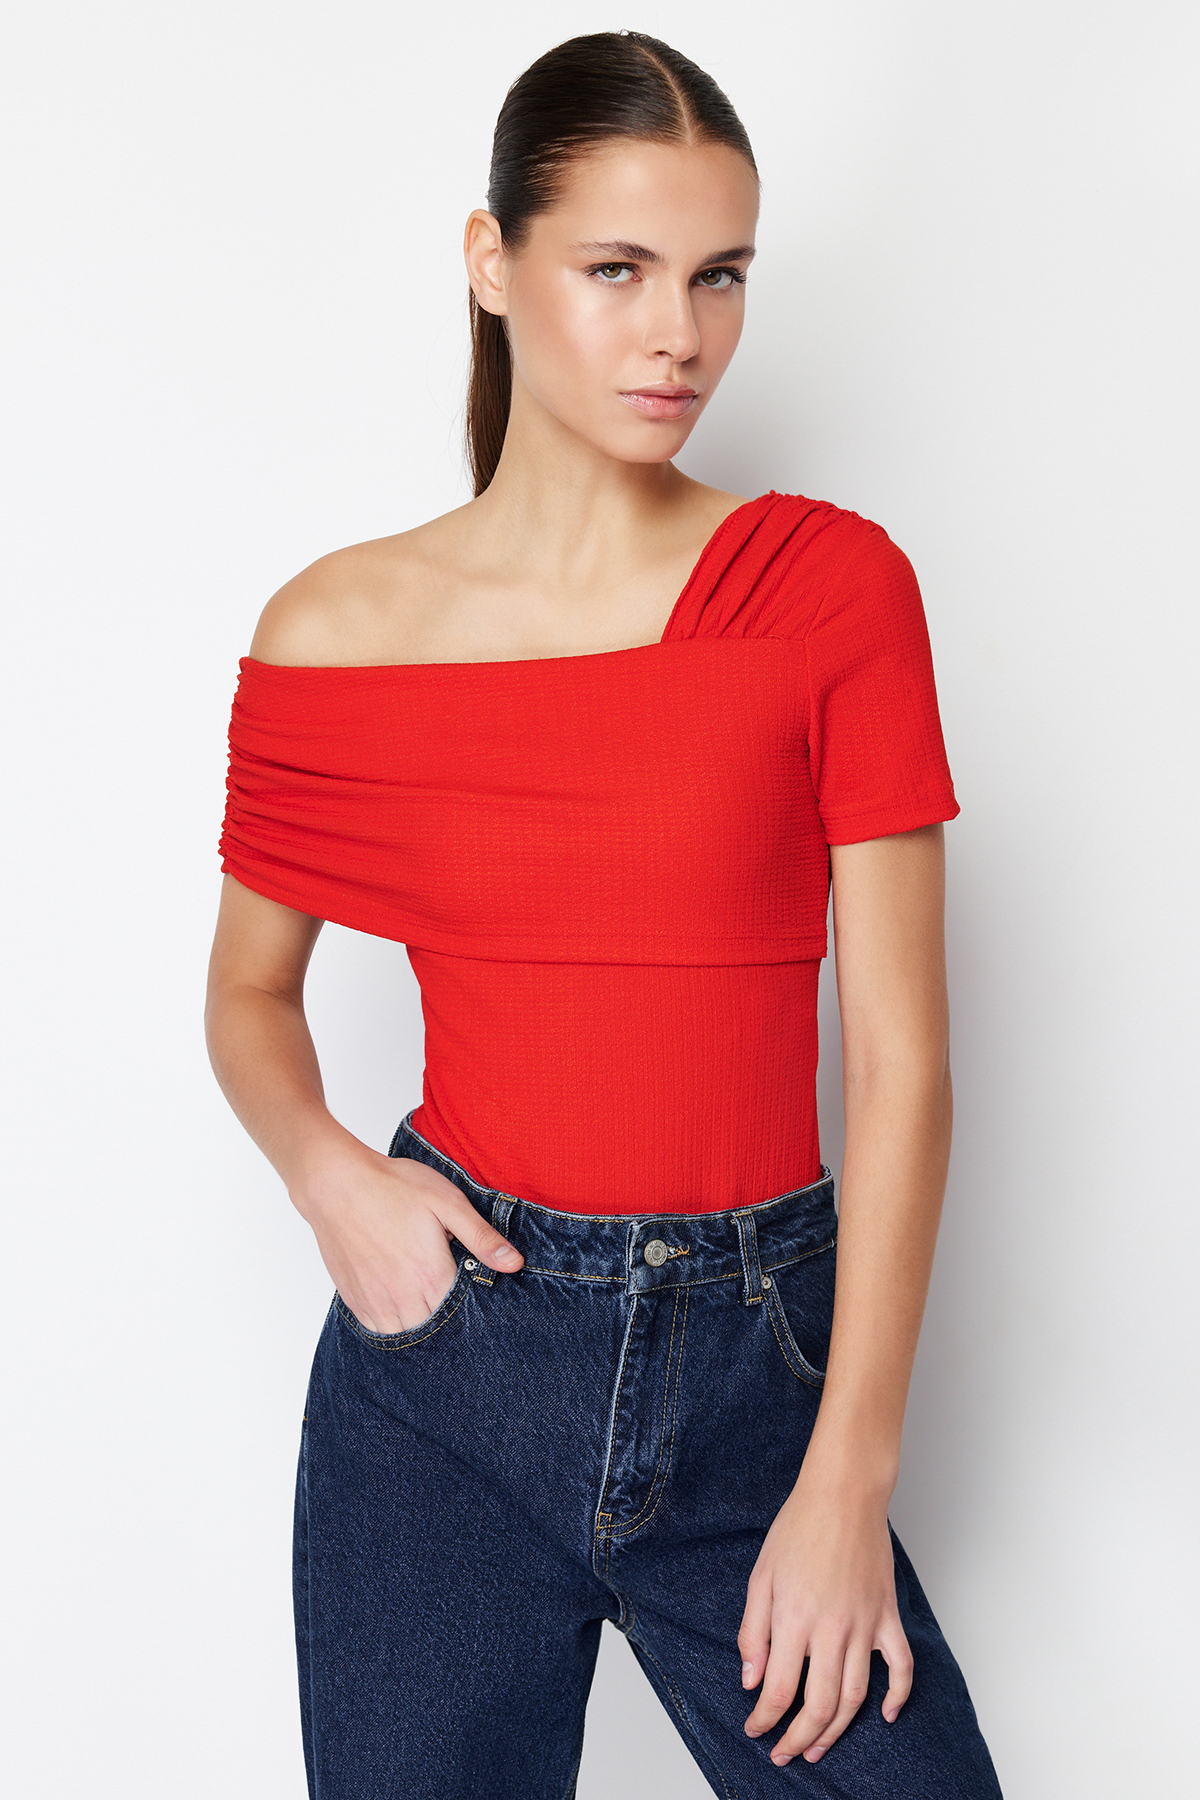 Trendyol Red Asymmetric Collar Fitted/Situated Snaps Knitted Bodysuit